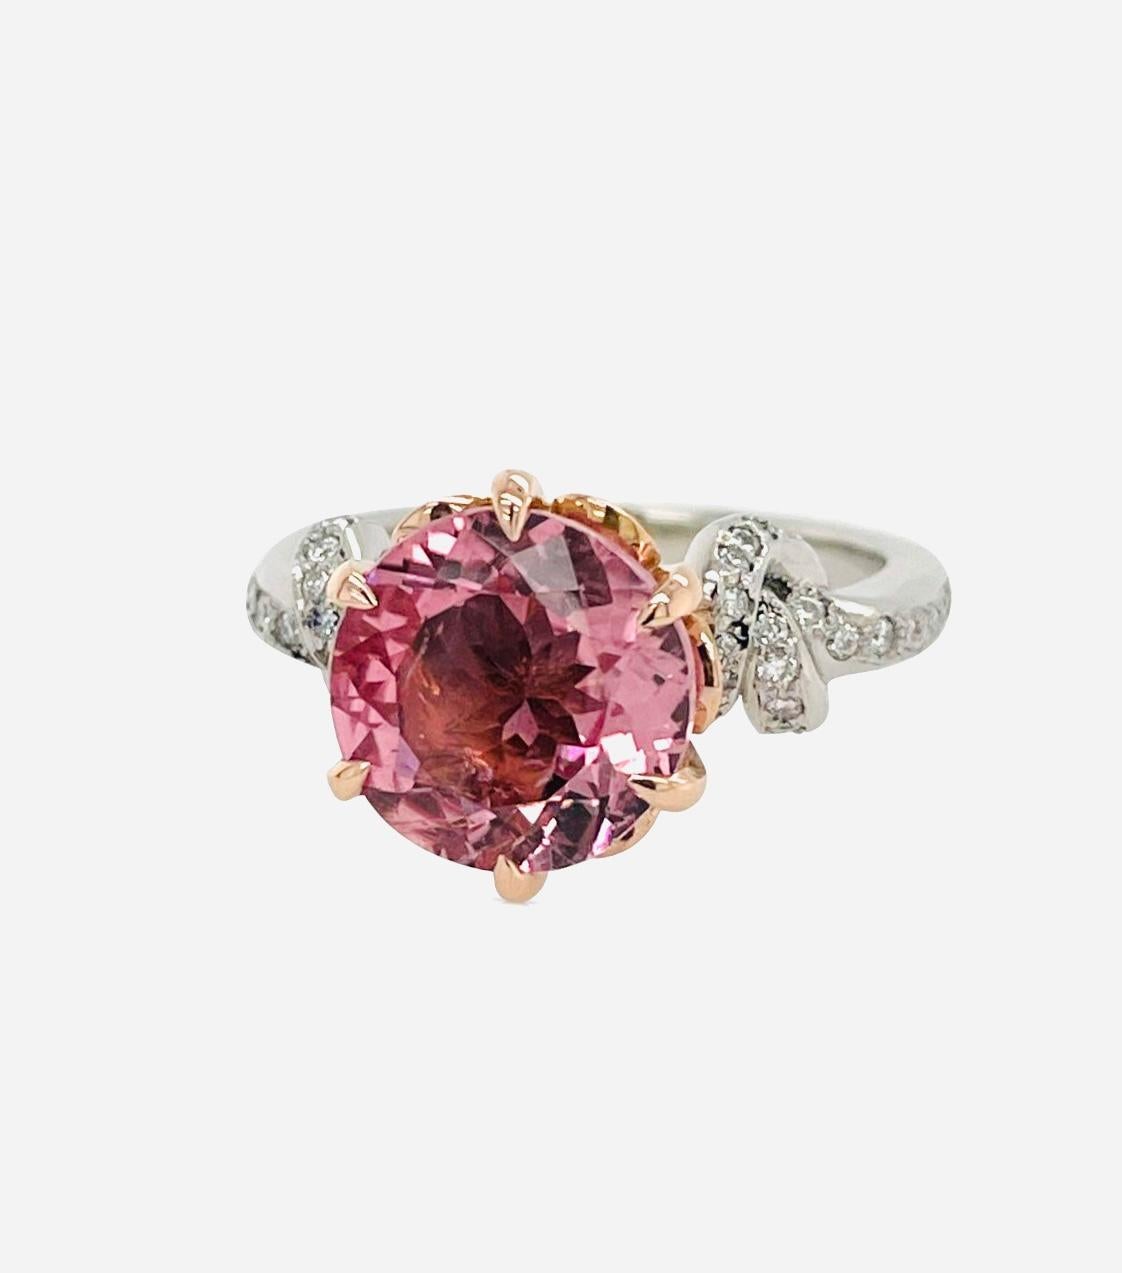 One of a kind 3.25ct Round Pink Tourmaline set in 18ct rose gold and platinum surrounded by FSI diamond band.


Made to order 
